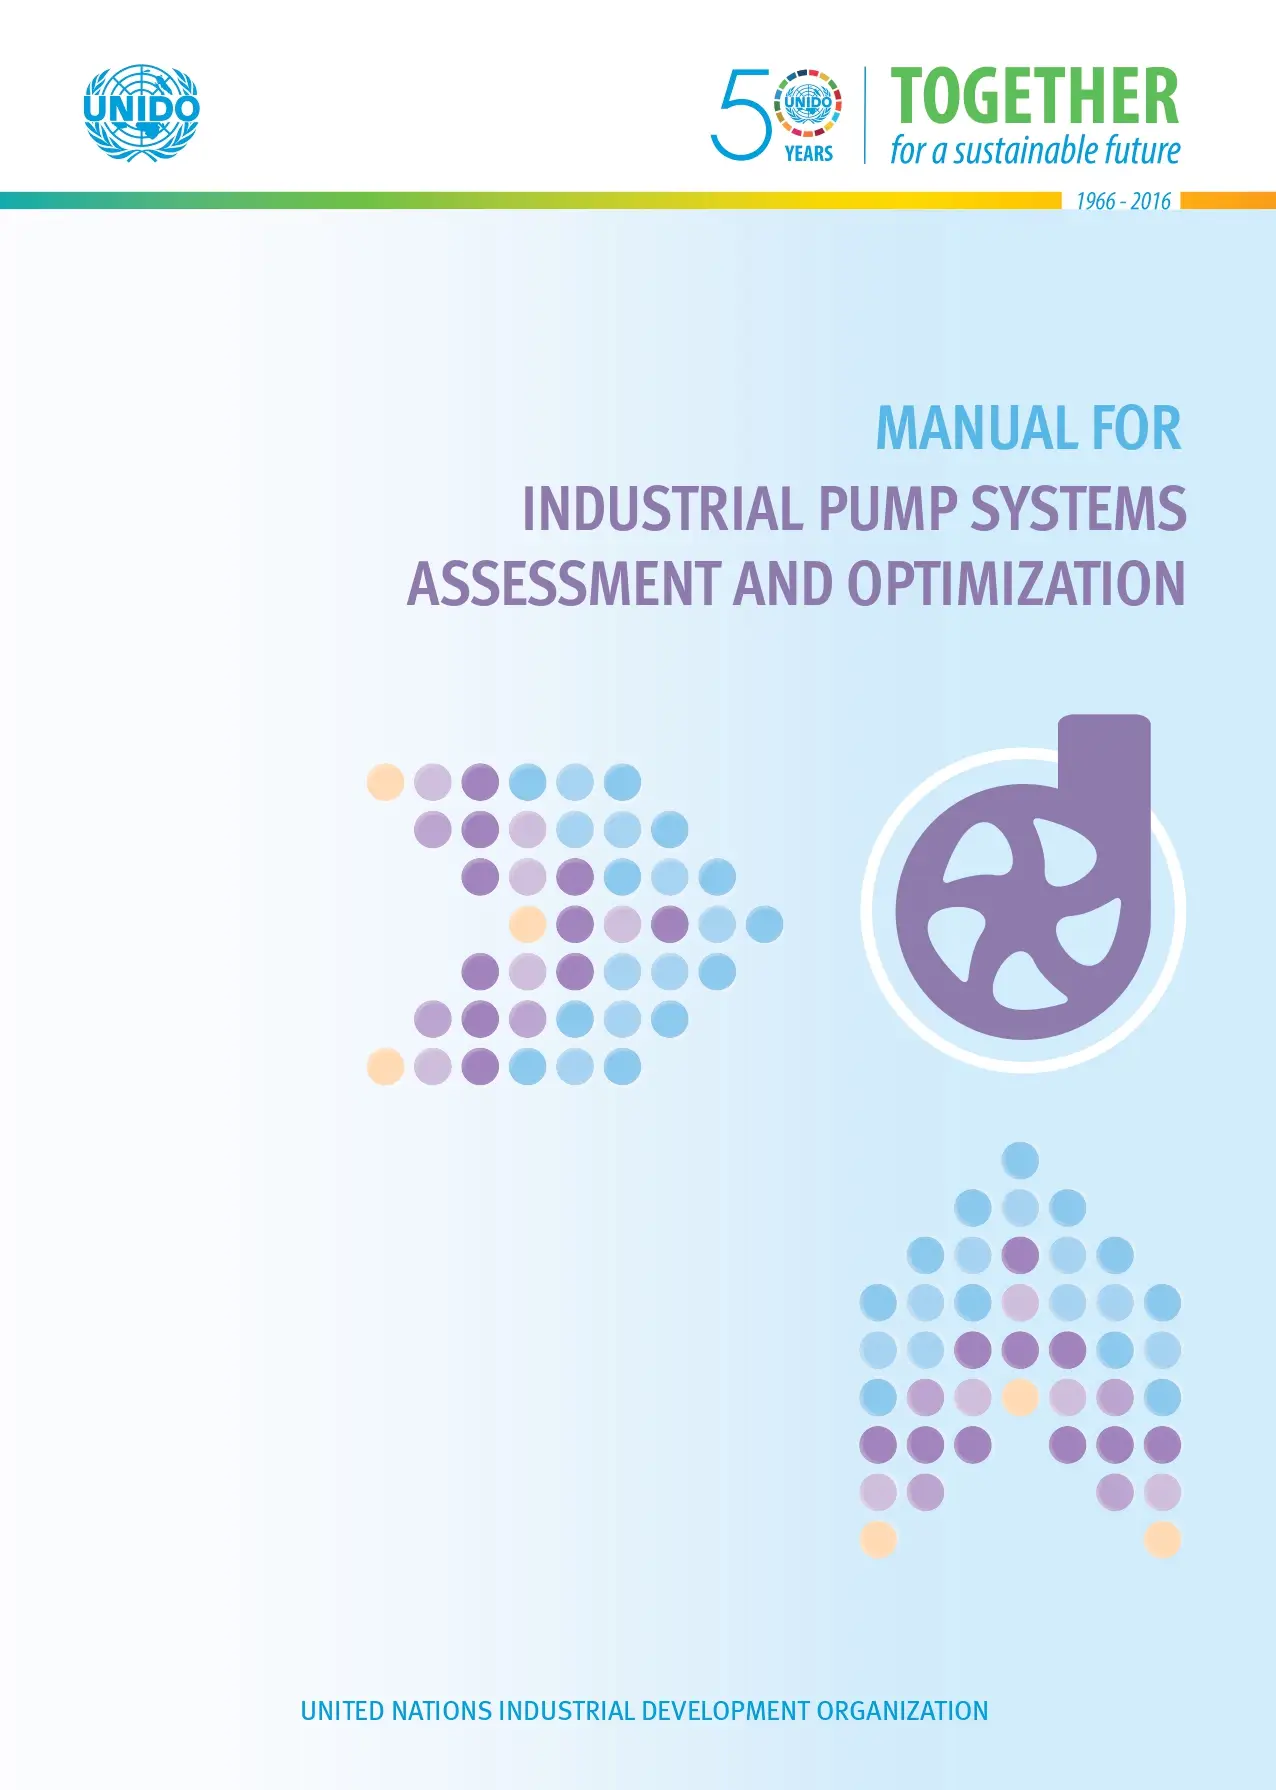 Manual for Industrial Pump Systems Assessment and Optimization